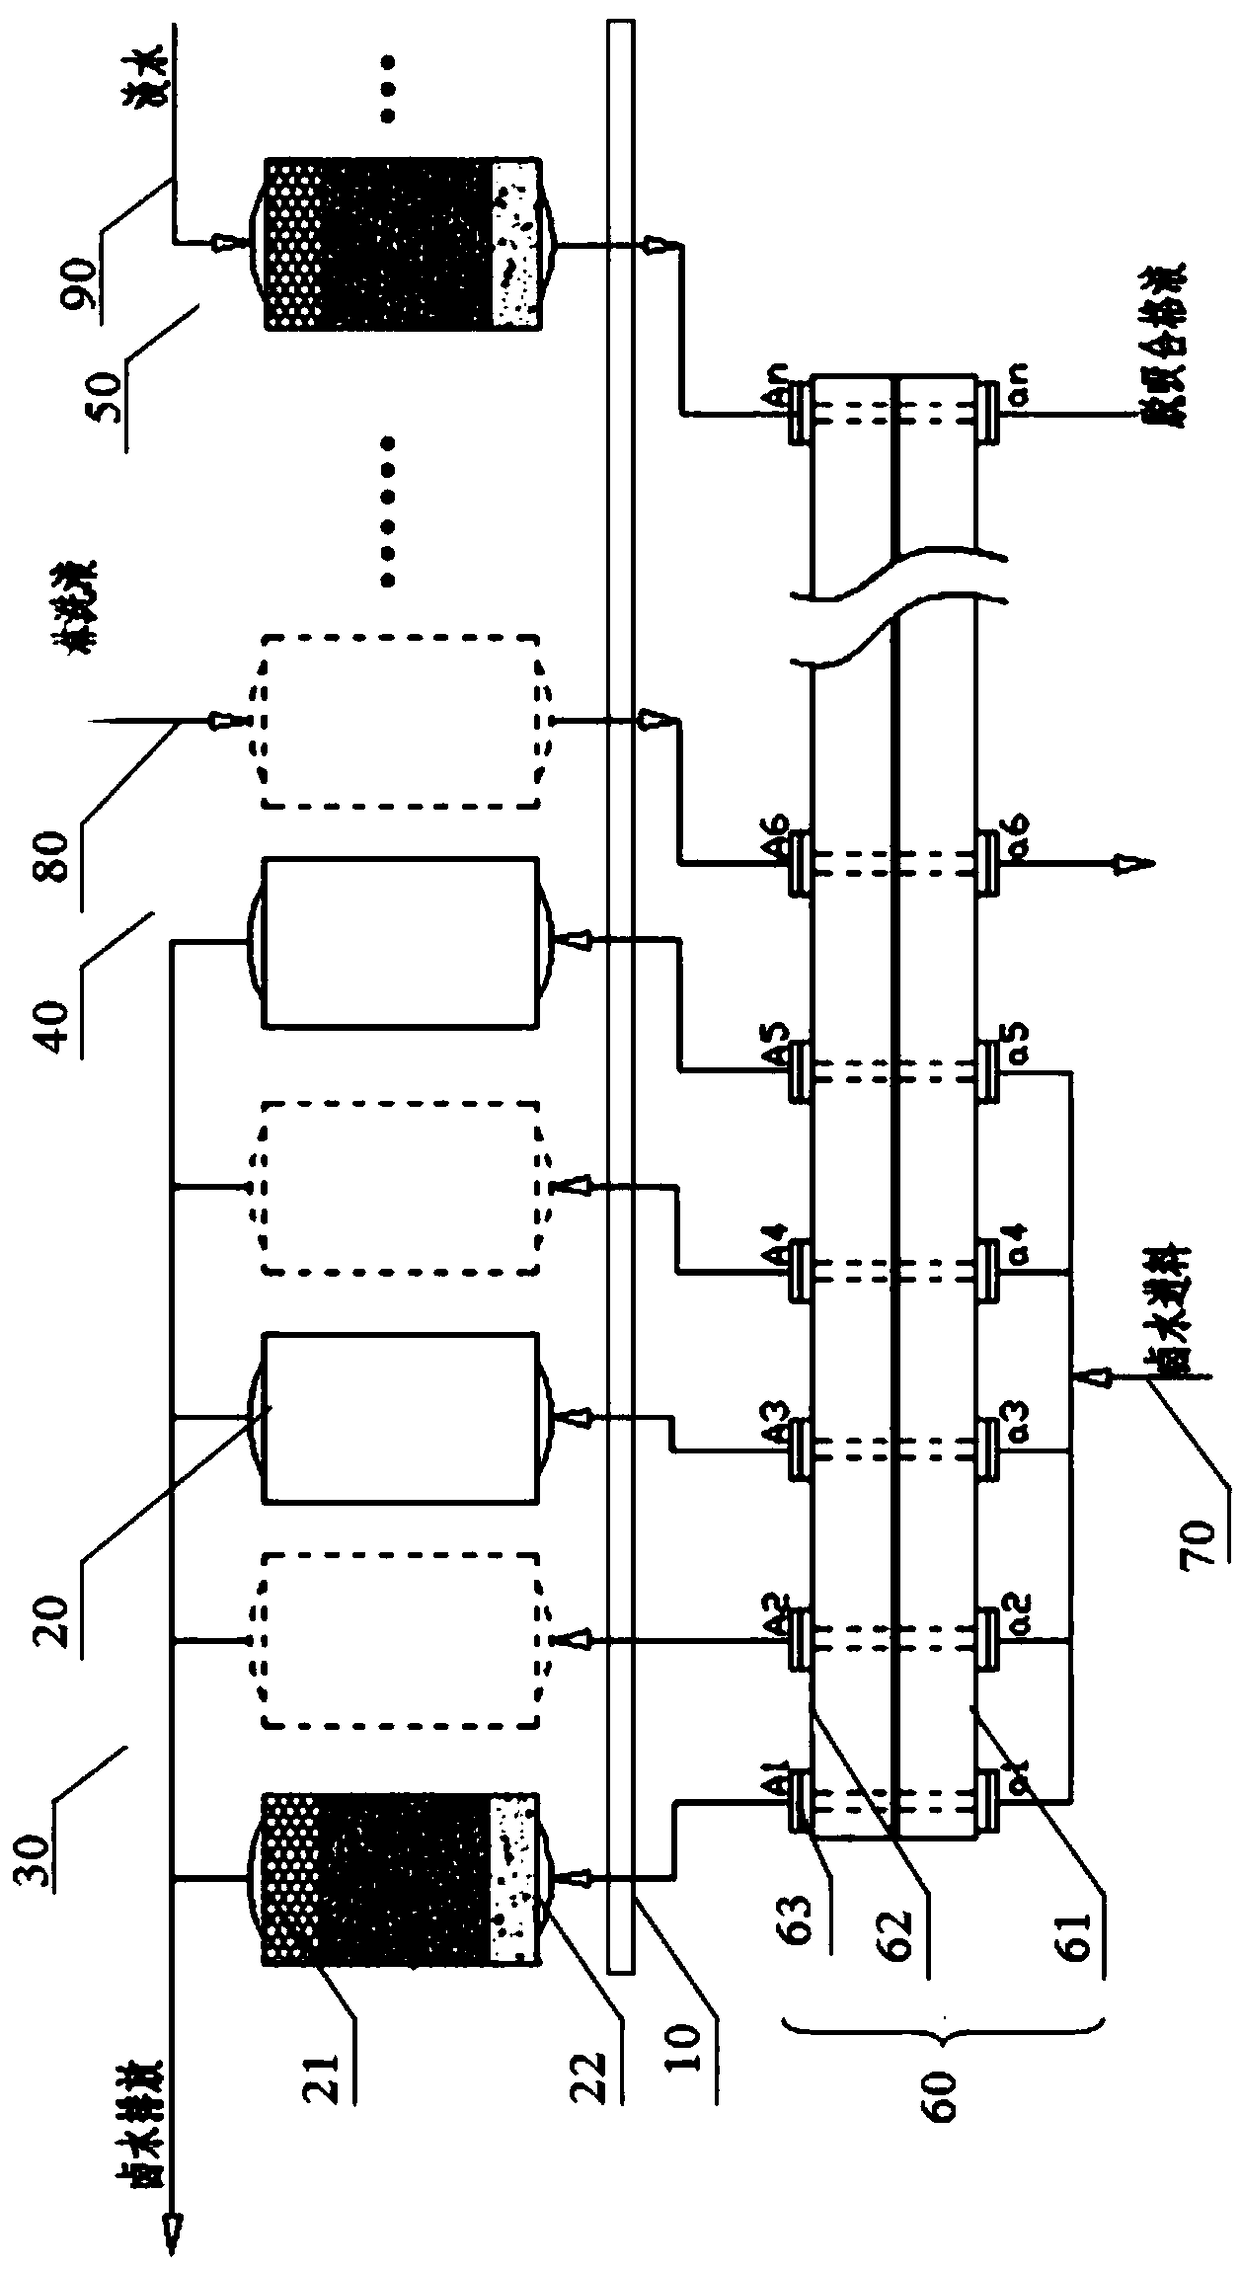 A continuous ion exchange device and lithium extraction process for extracting lithium